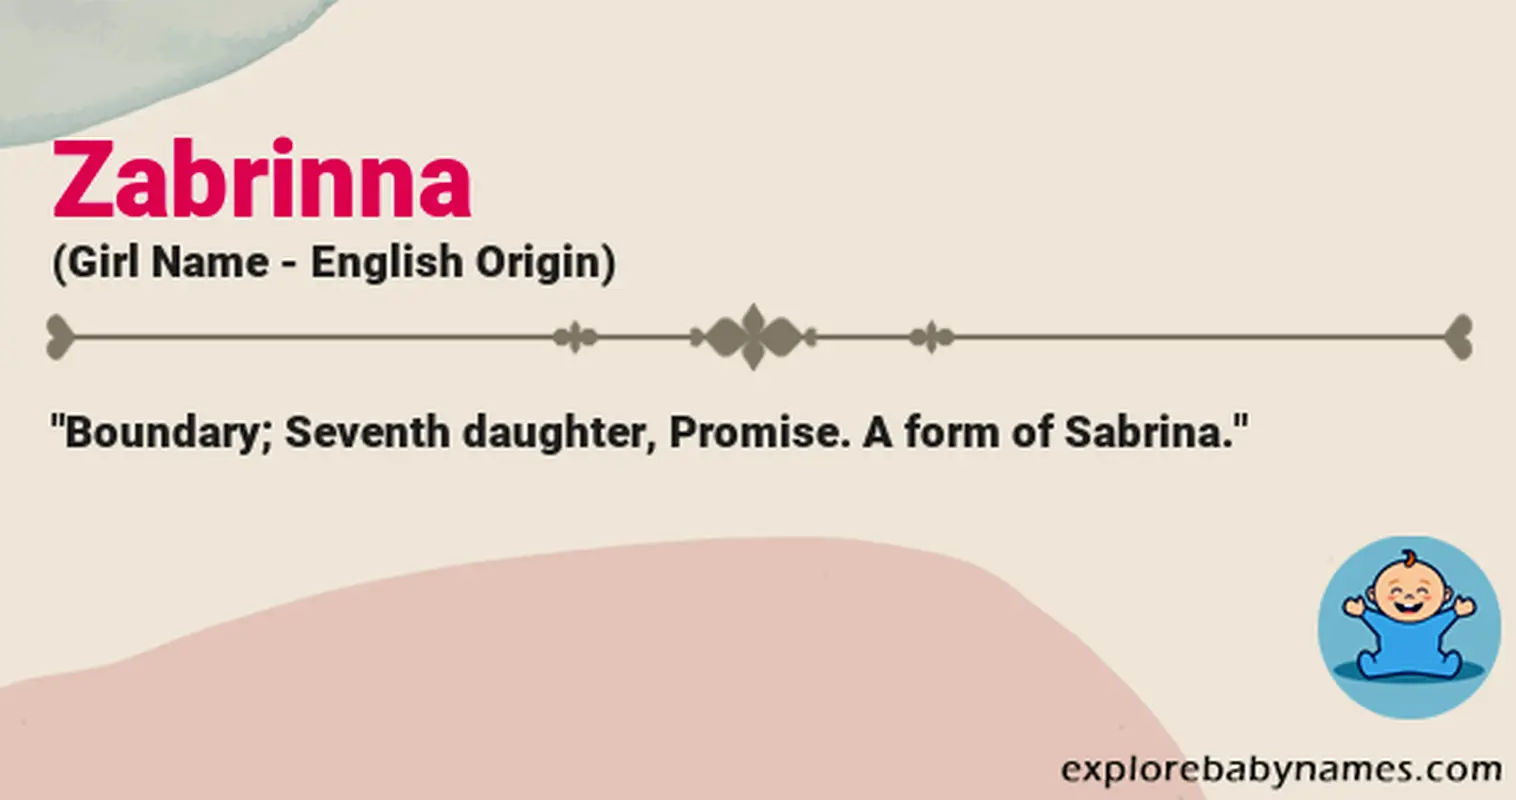 Meaning of Zabrinna